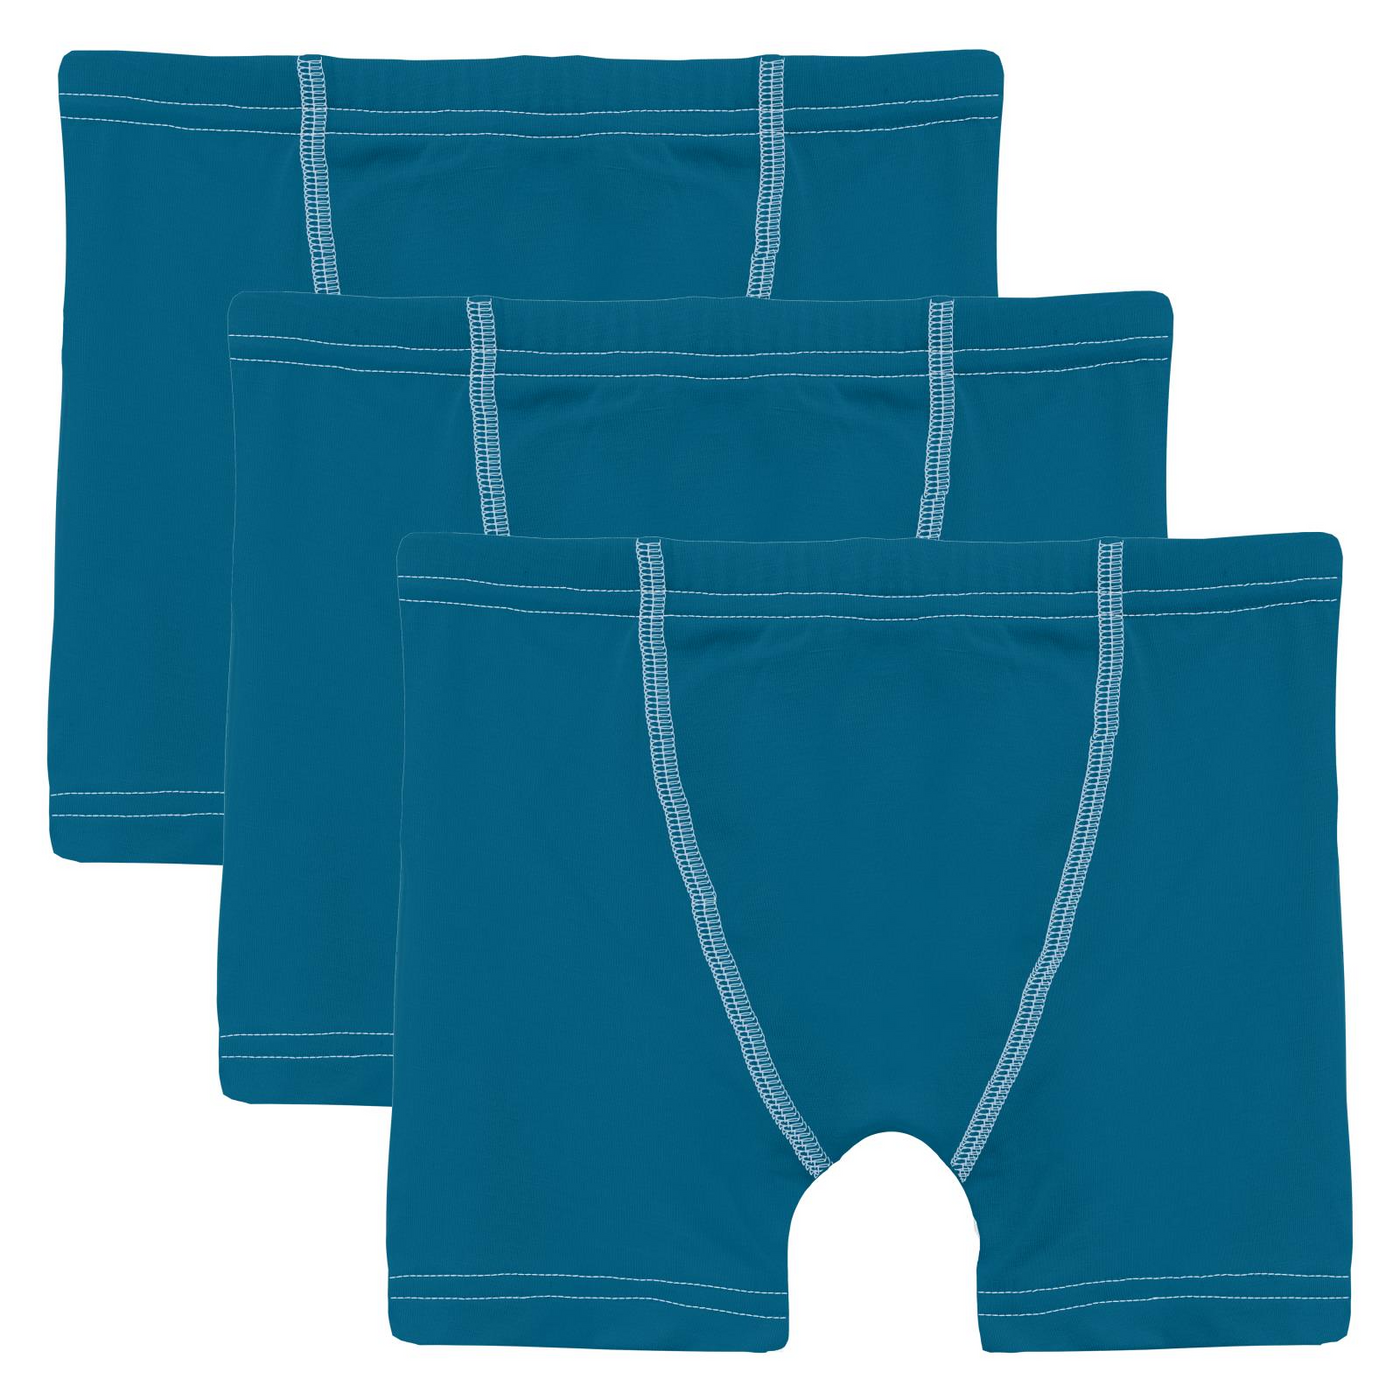 Kickee Pants Boy's Boxer Brief Set of 3: Seaport with Dew